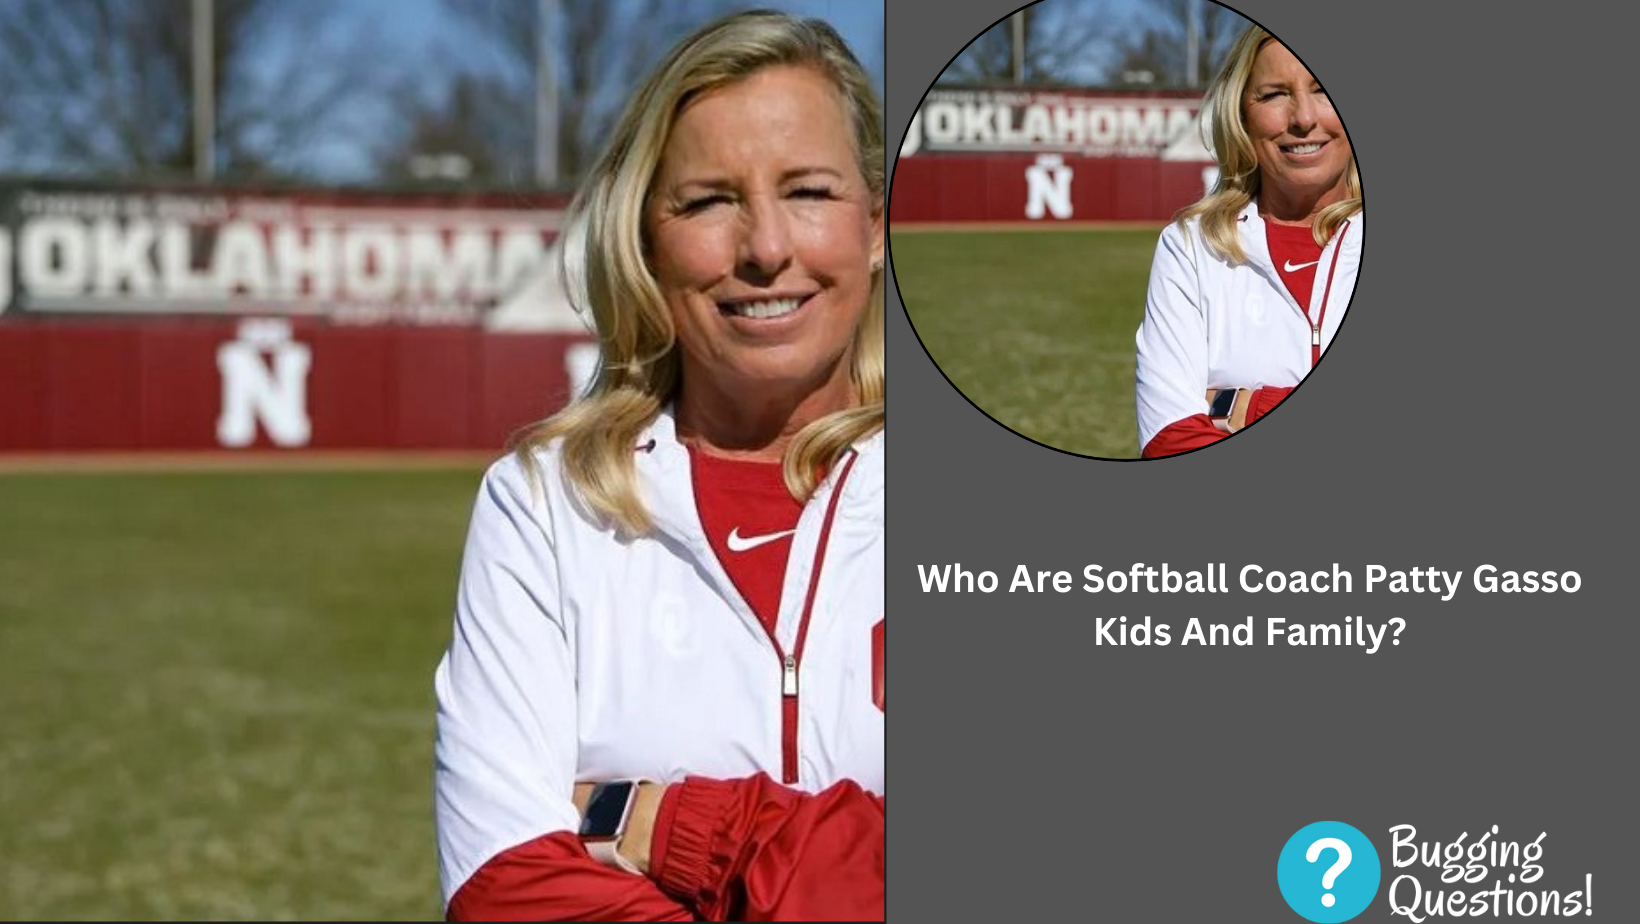 Who Are Softball Coach Patty Gasso Kids And Family?